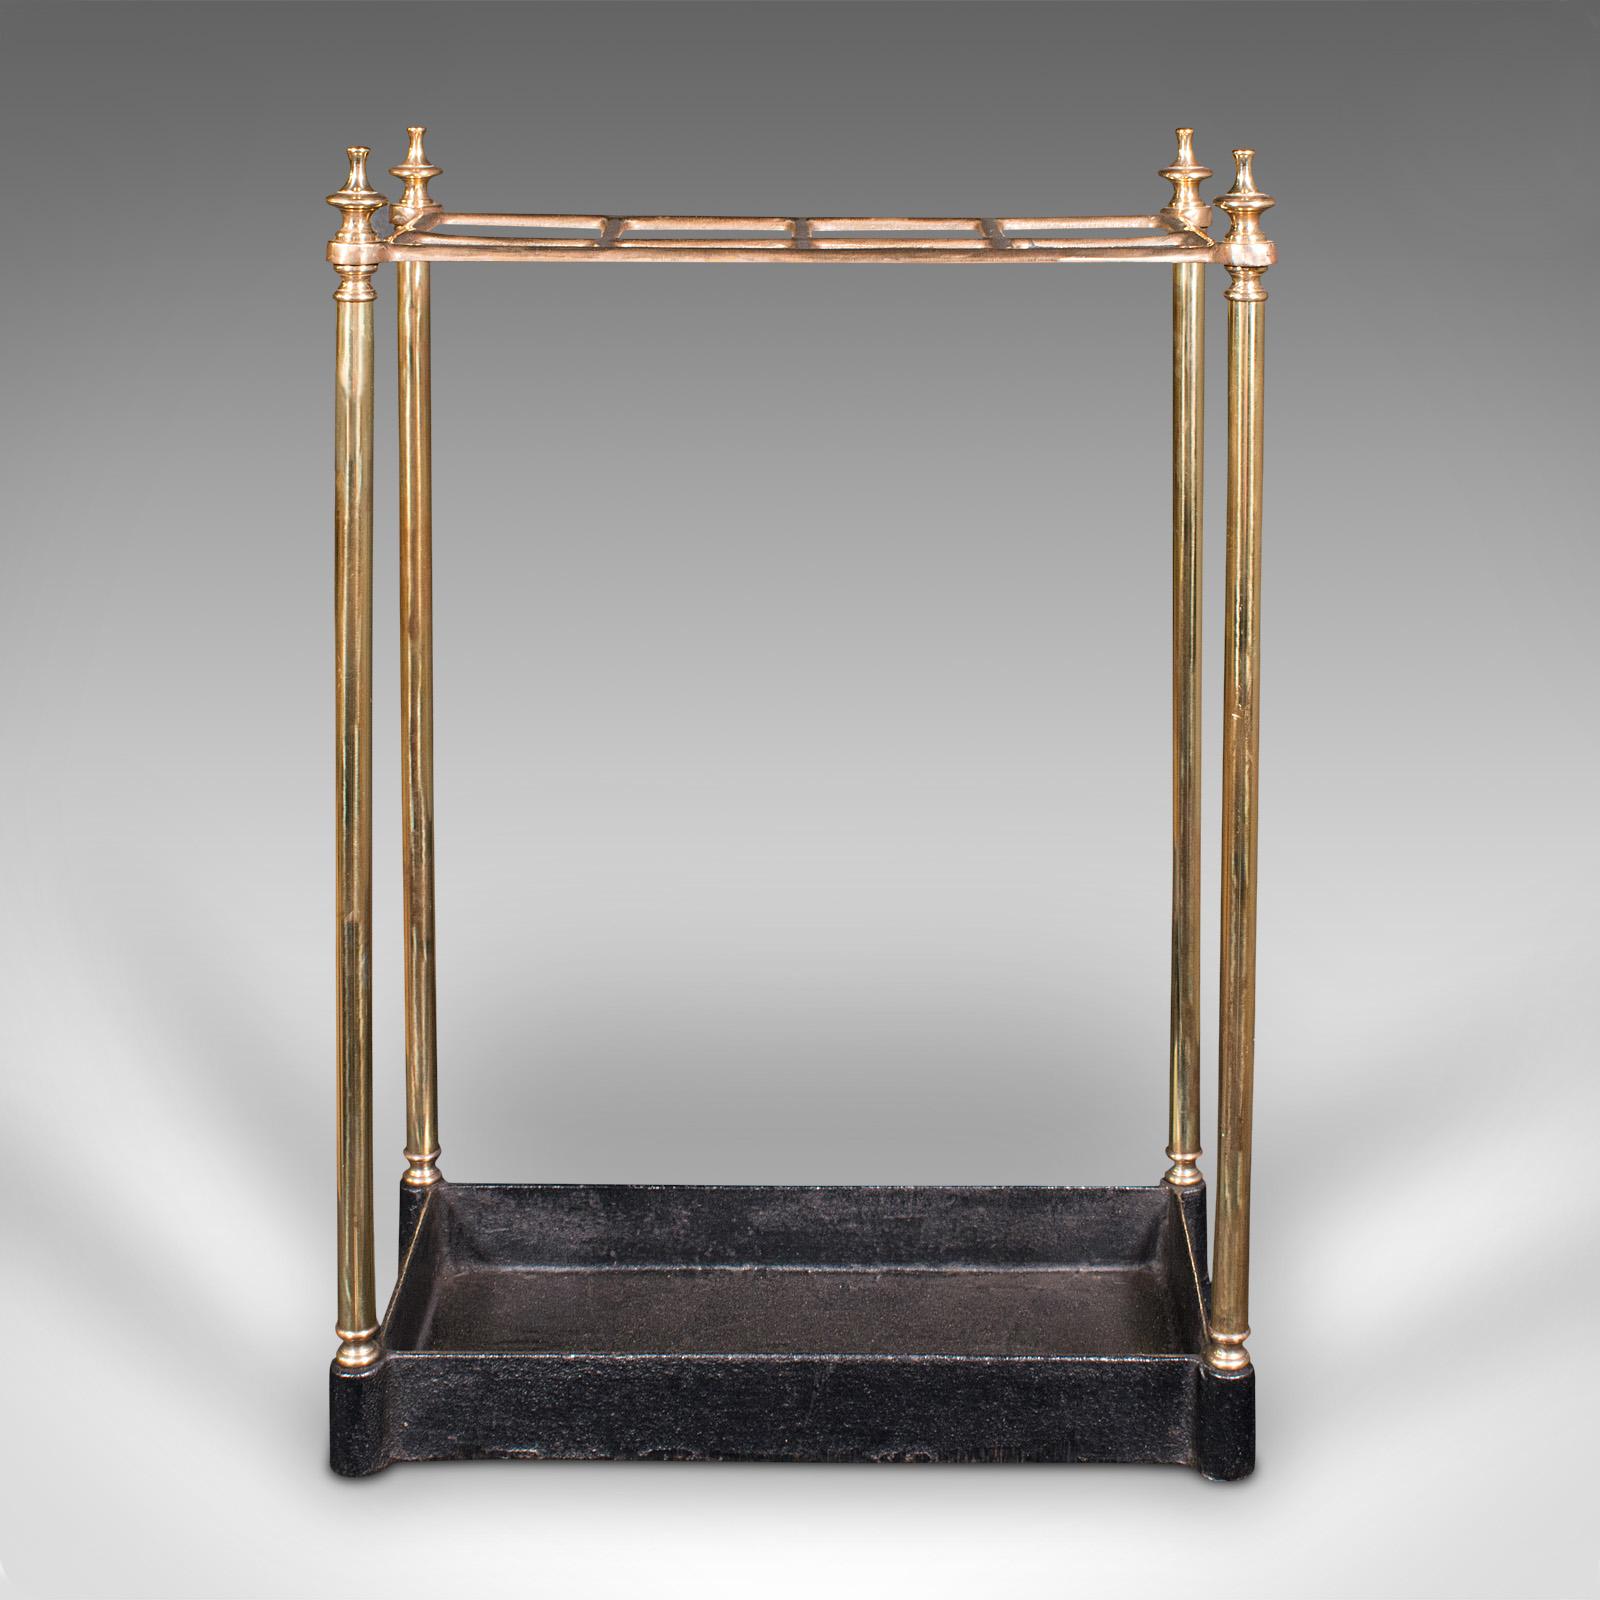 Late Victorian Antique Segmented Stick Stand, English, Brass, Hallway Rack, Victorian c. 1900 For Sale